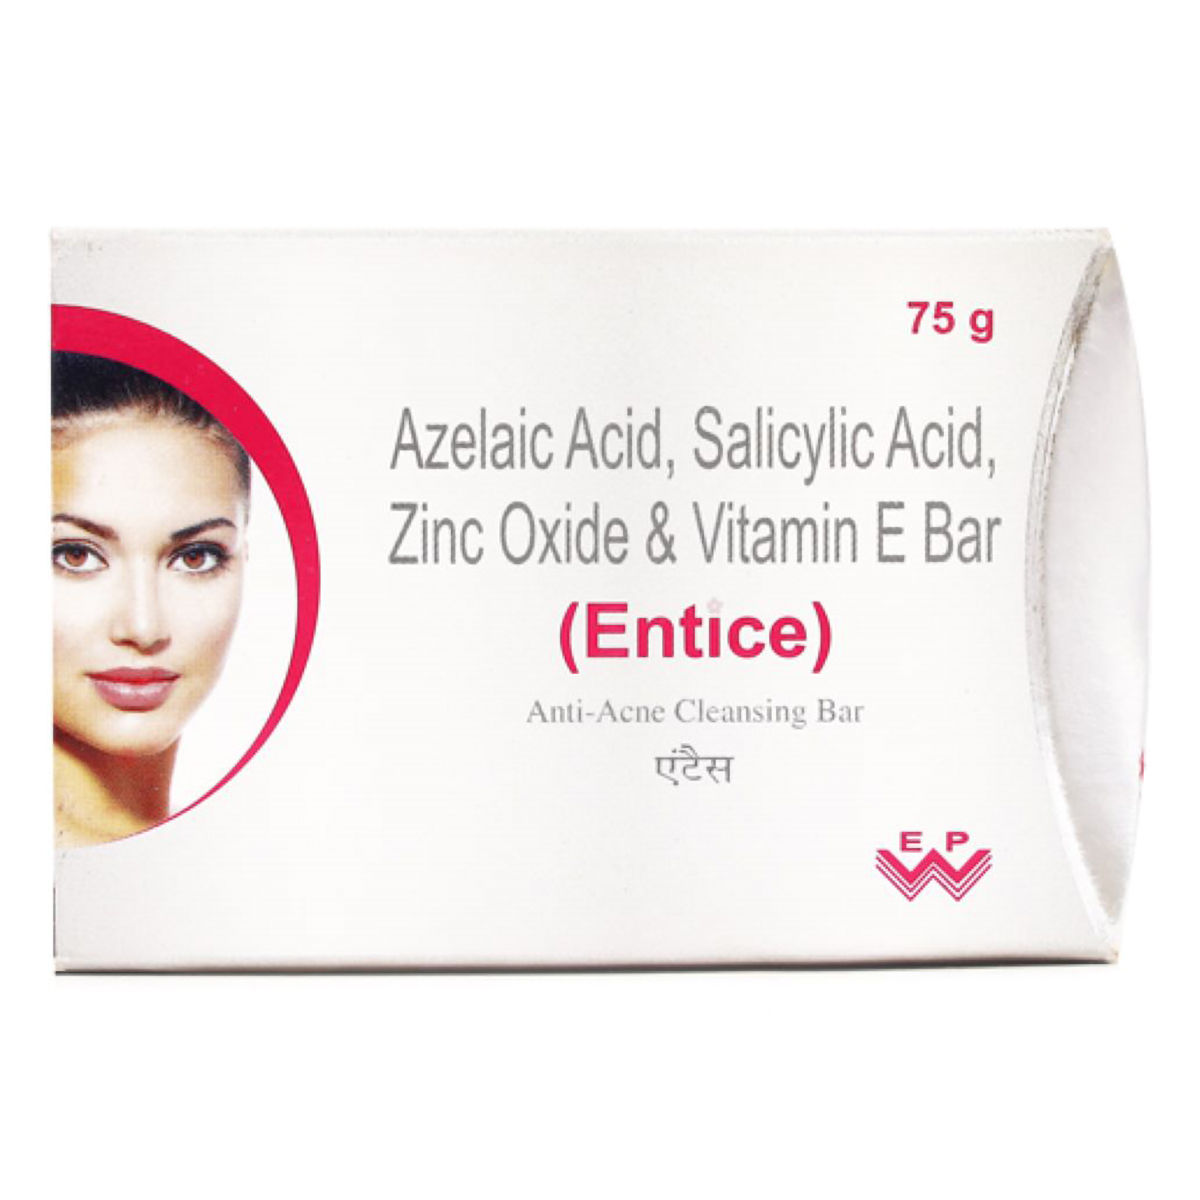 Buy Entice Anti-Acne Cleansing Bar, 75 gm Online